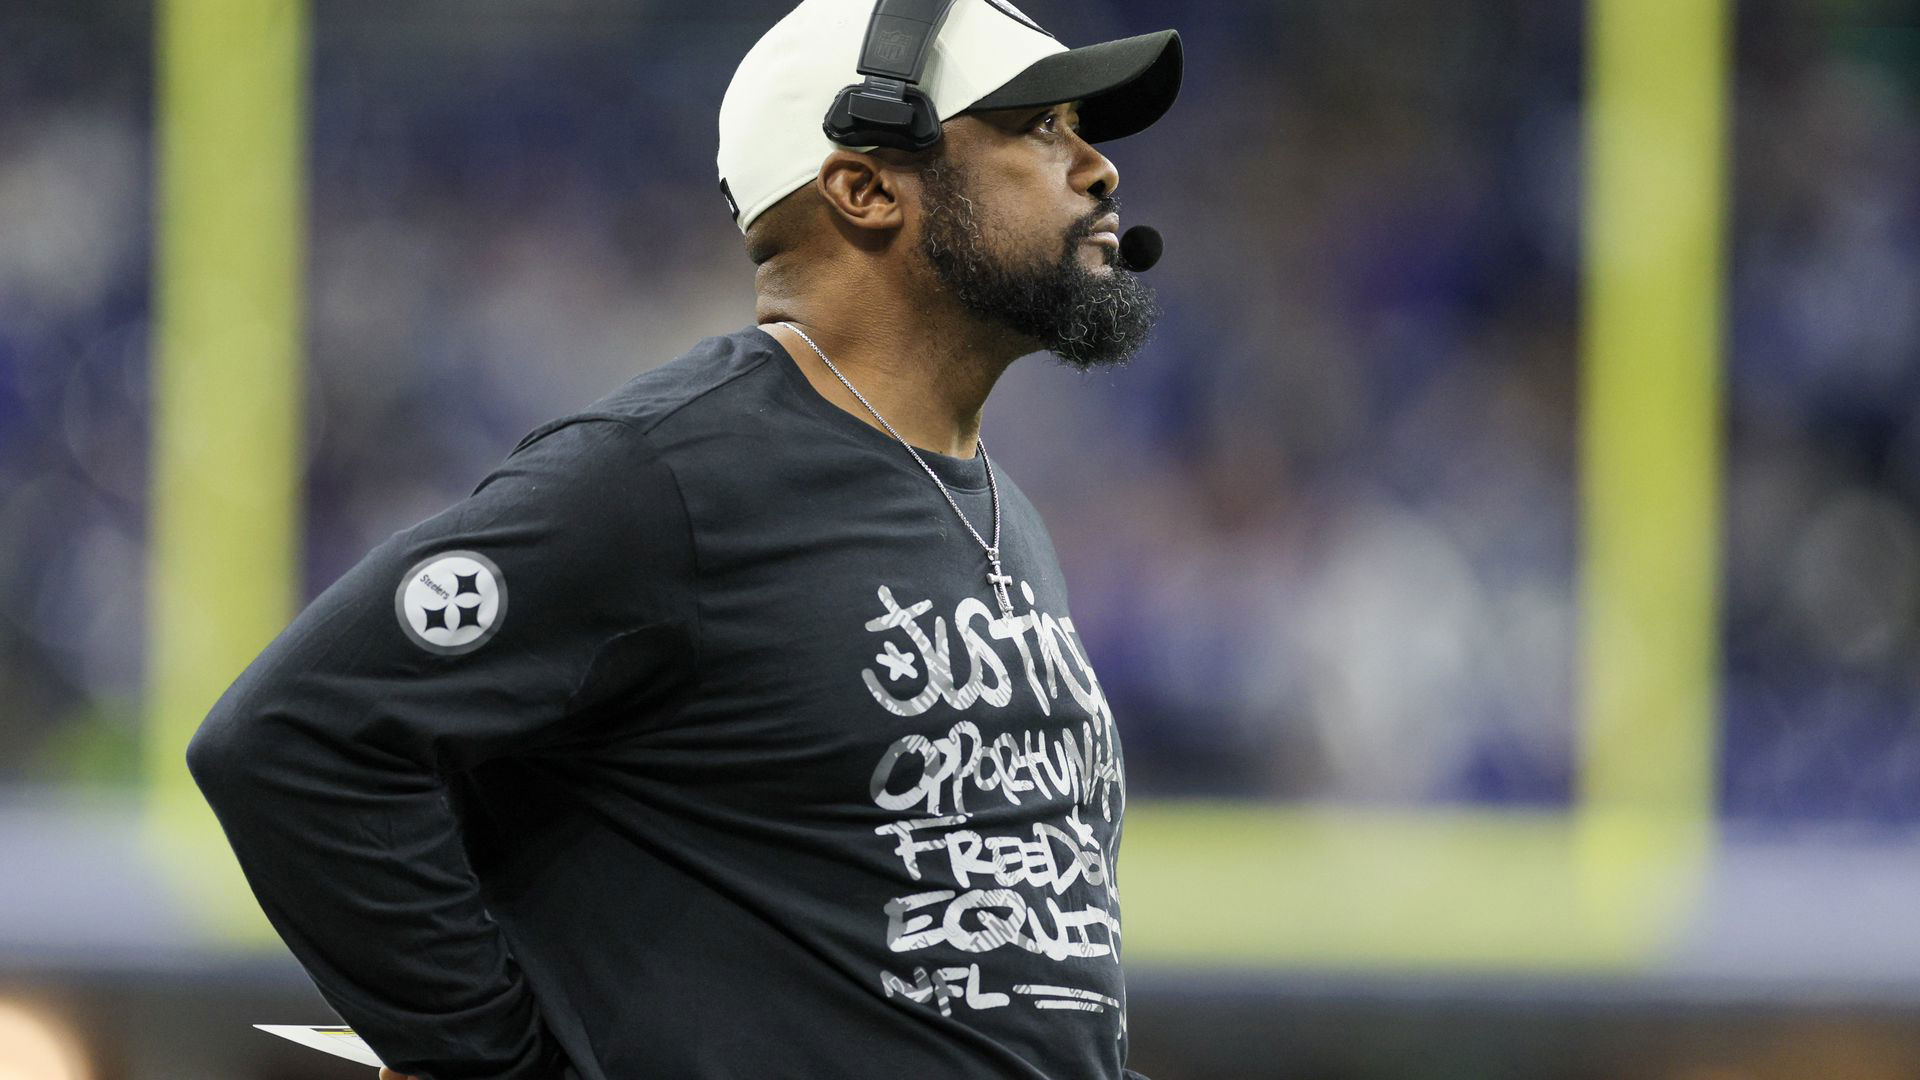 Mike Tomlin ‘should want to be fired’, says former NFL scout